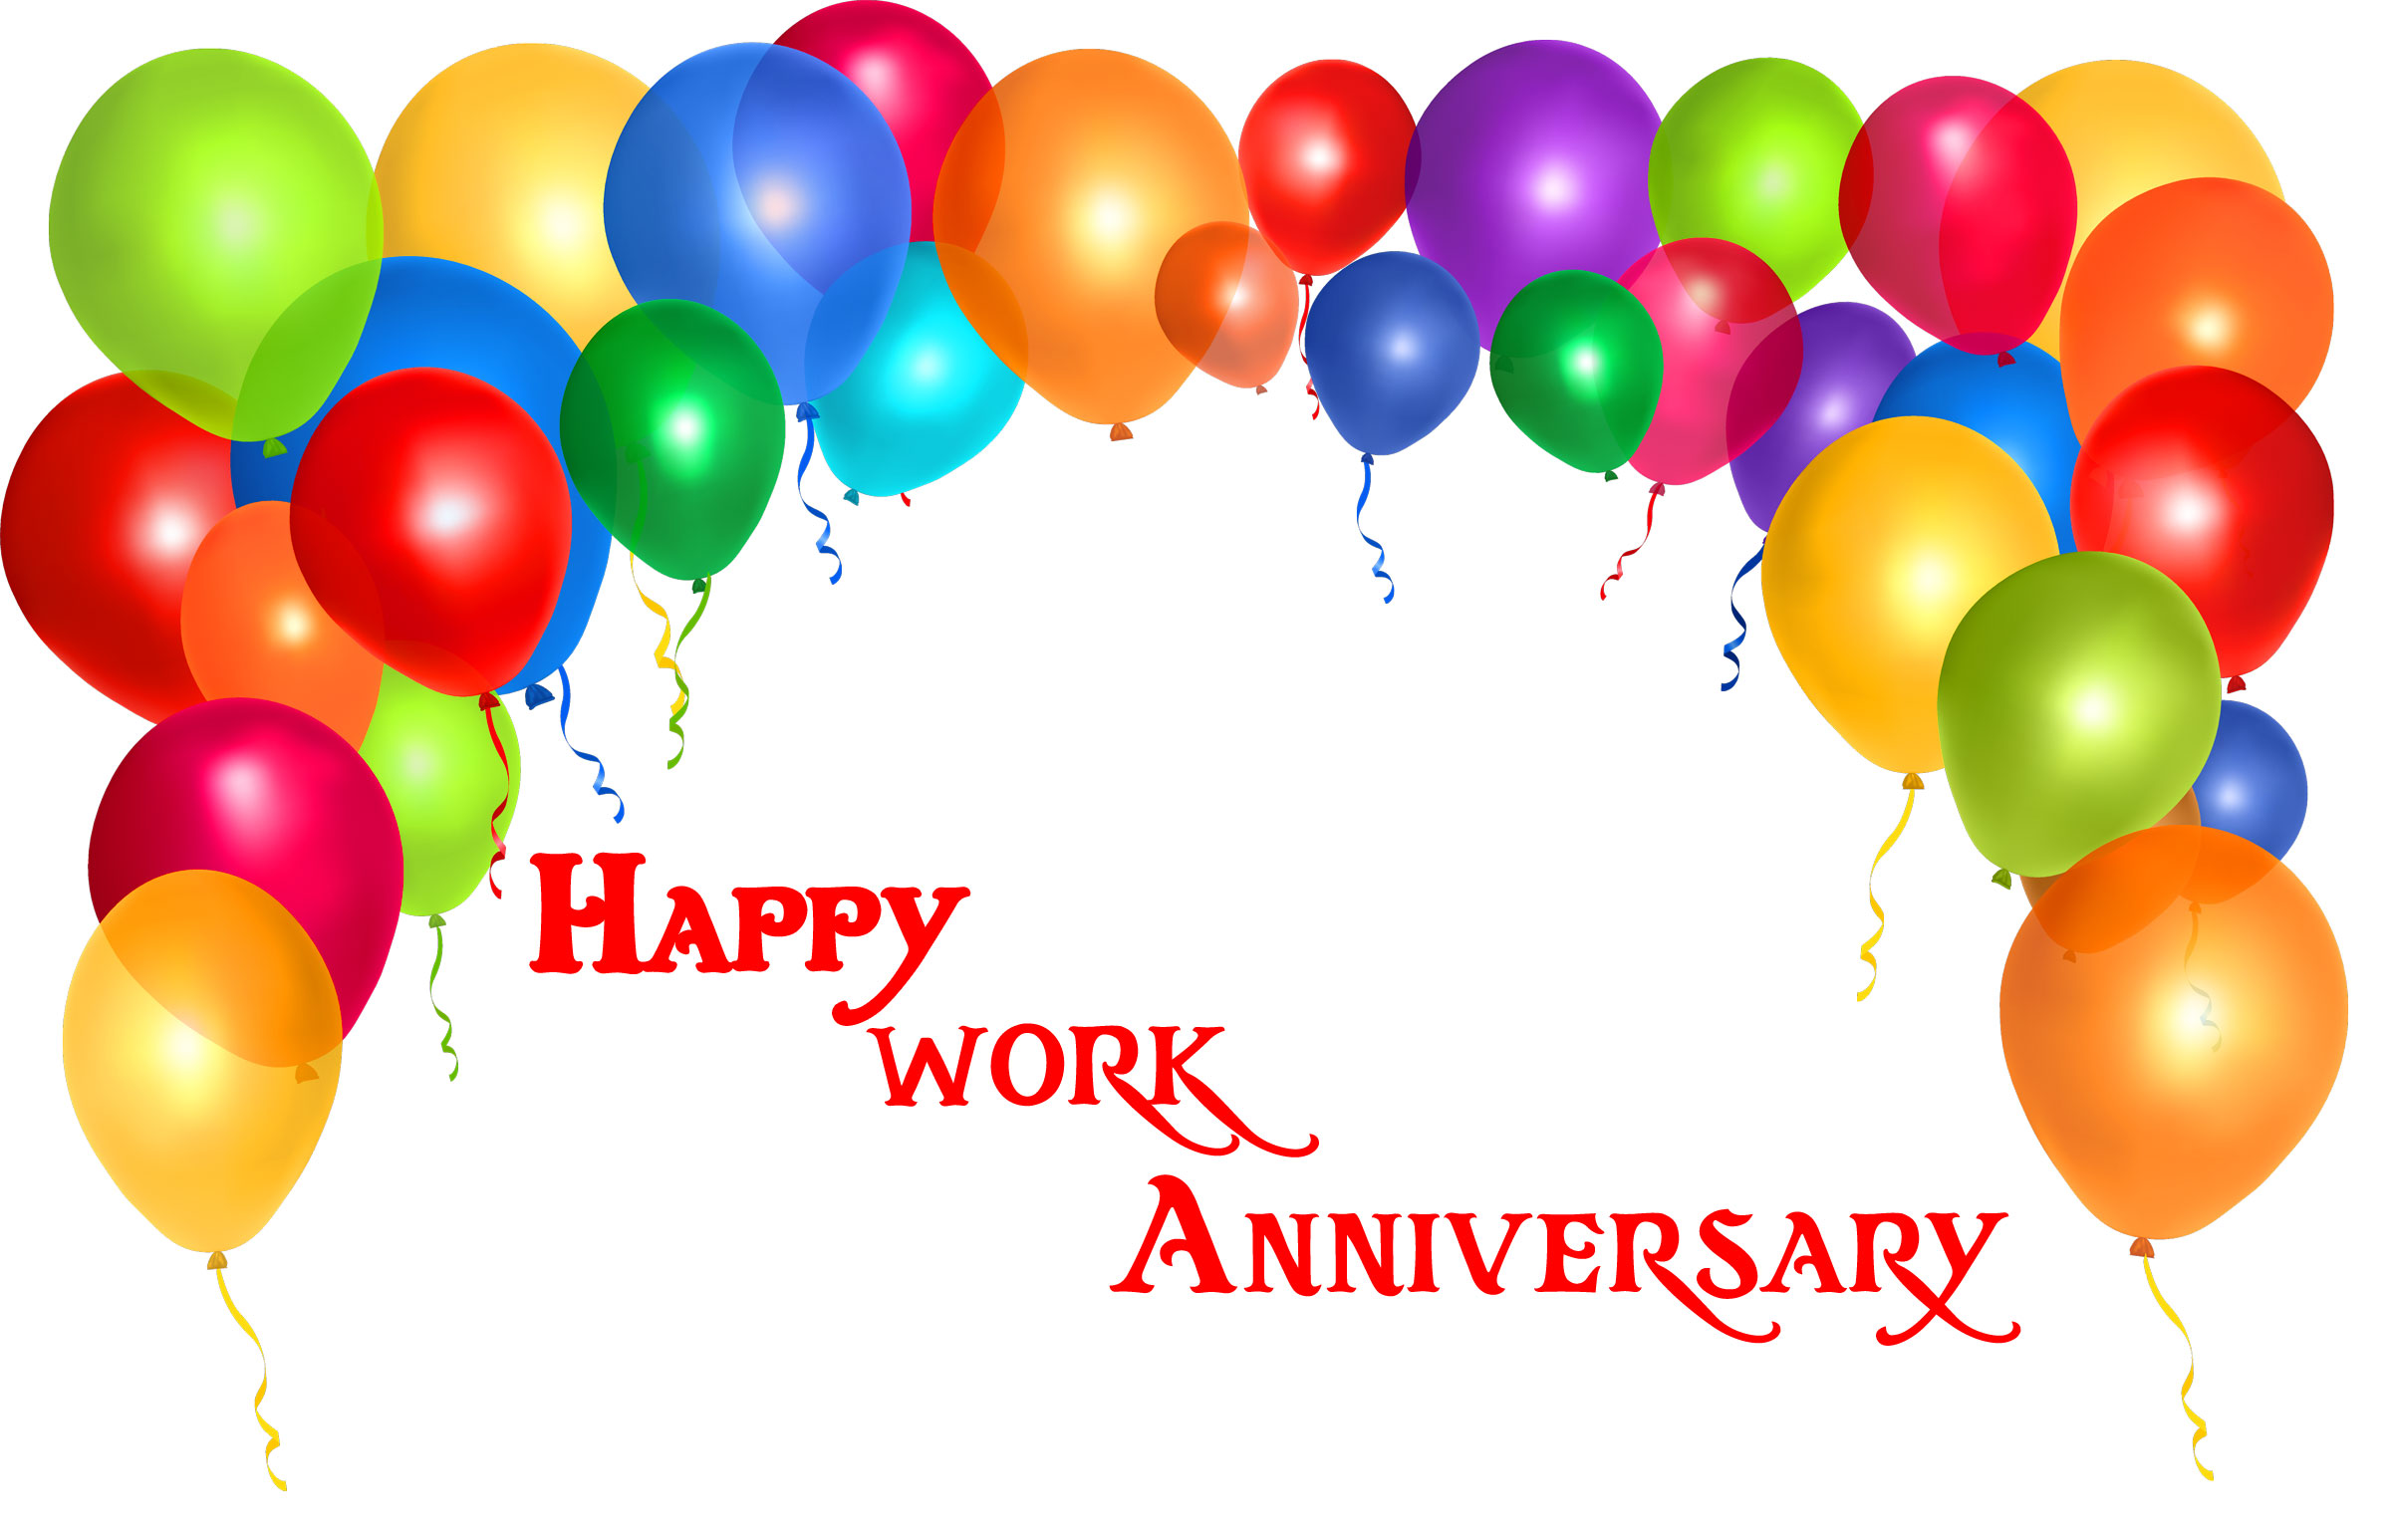 Balloons with Happy Work Anniversary Image